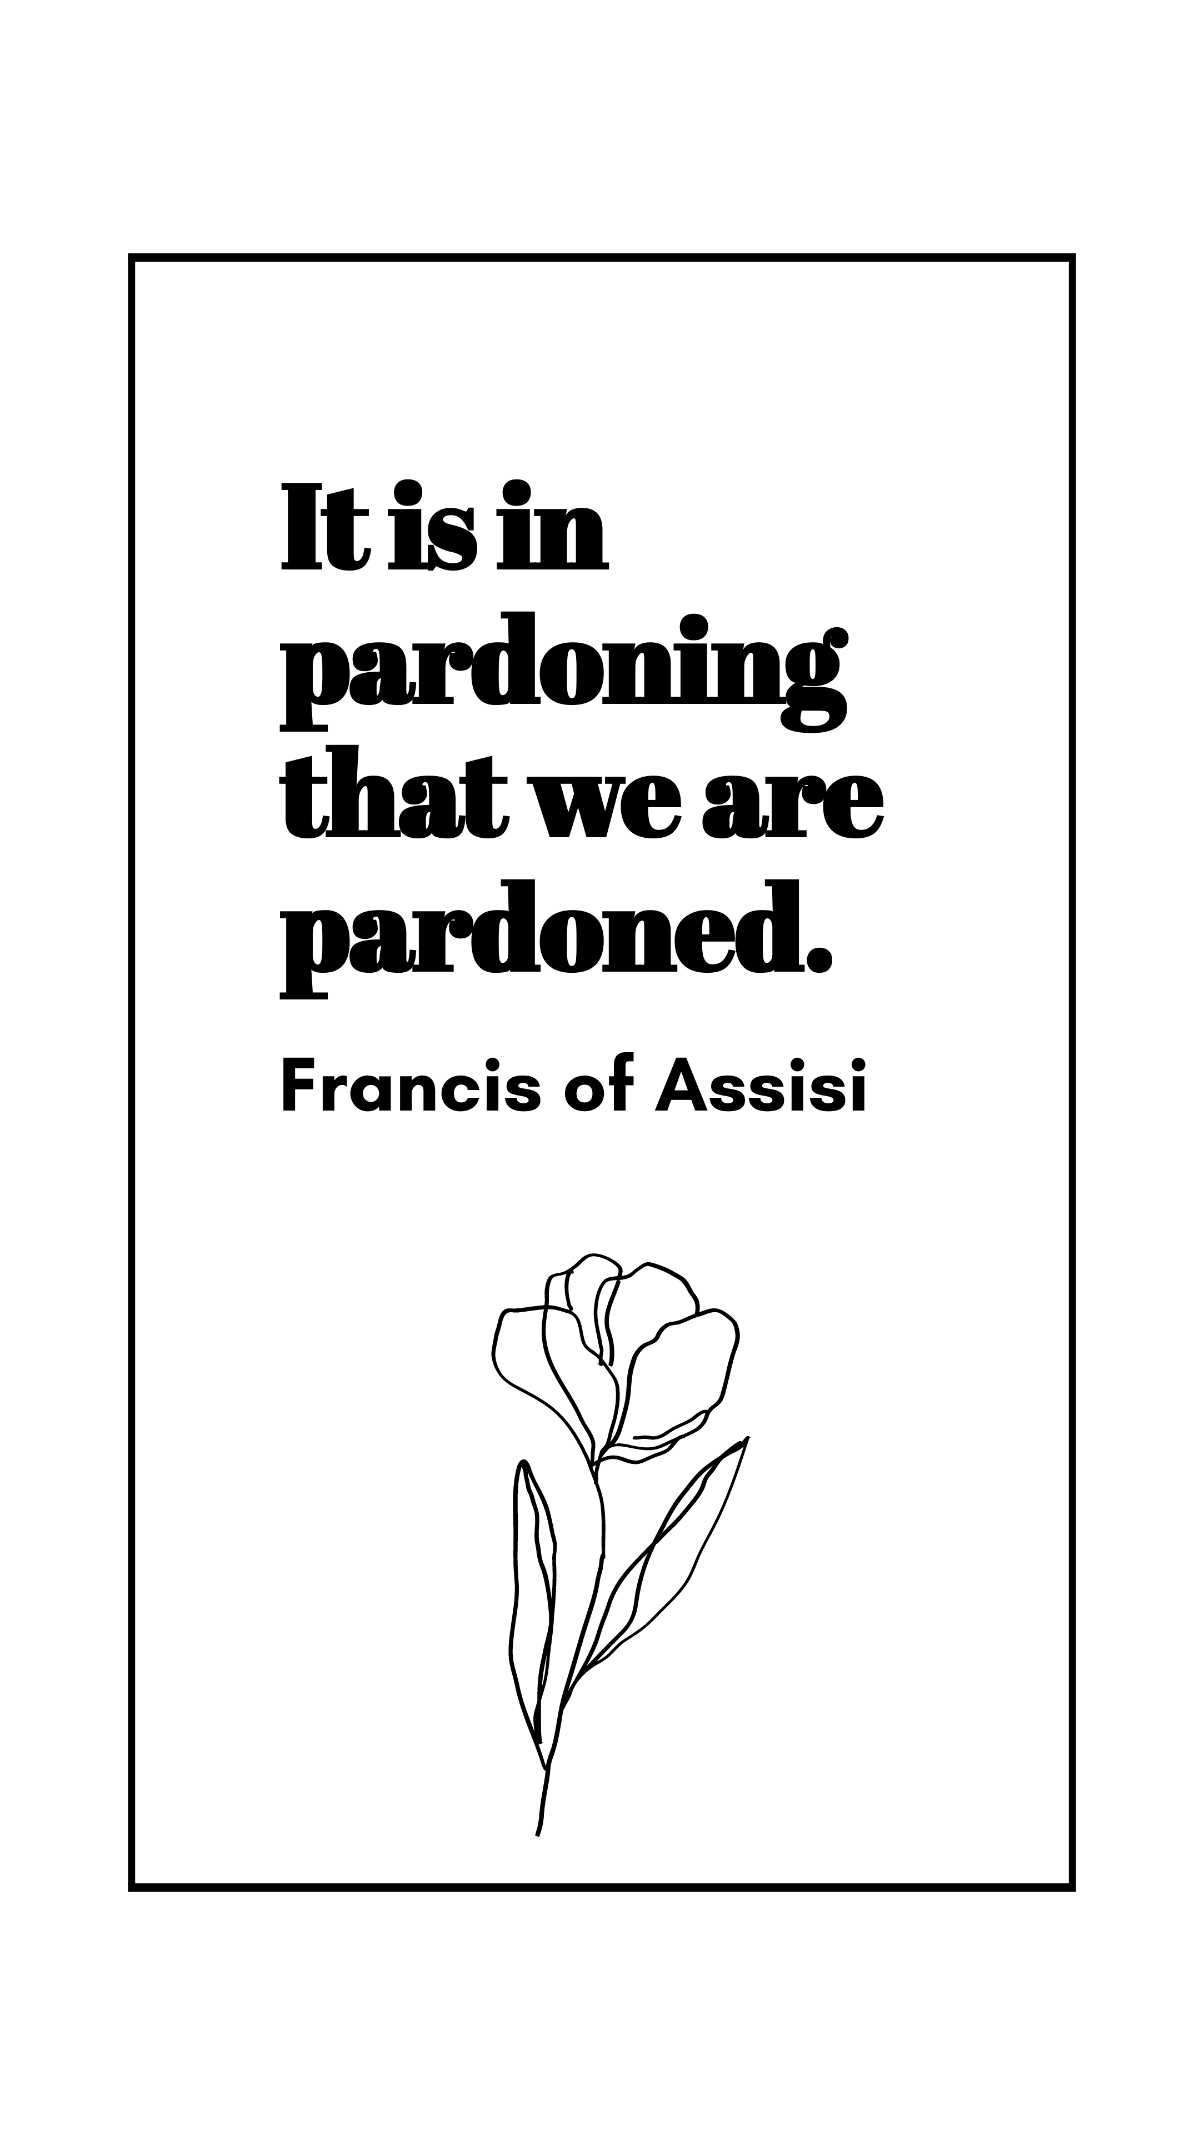 Free Francis of Assisi - It is in pardoning that we are pardoned. Template